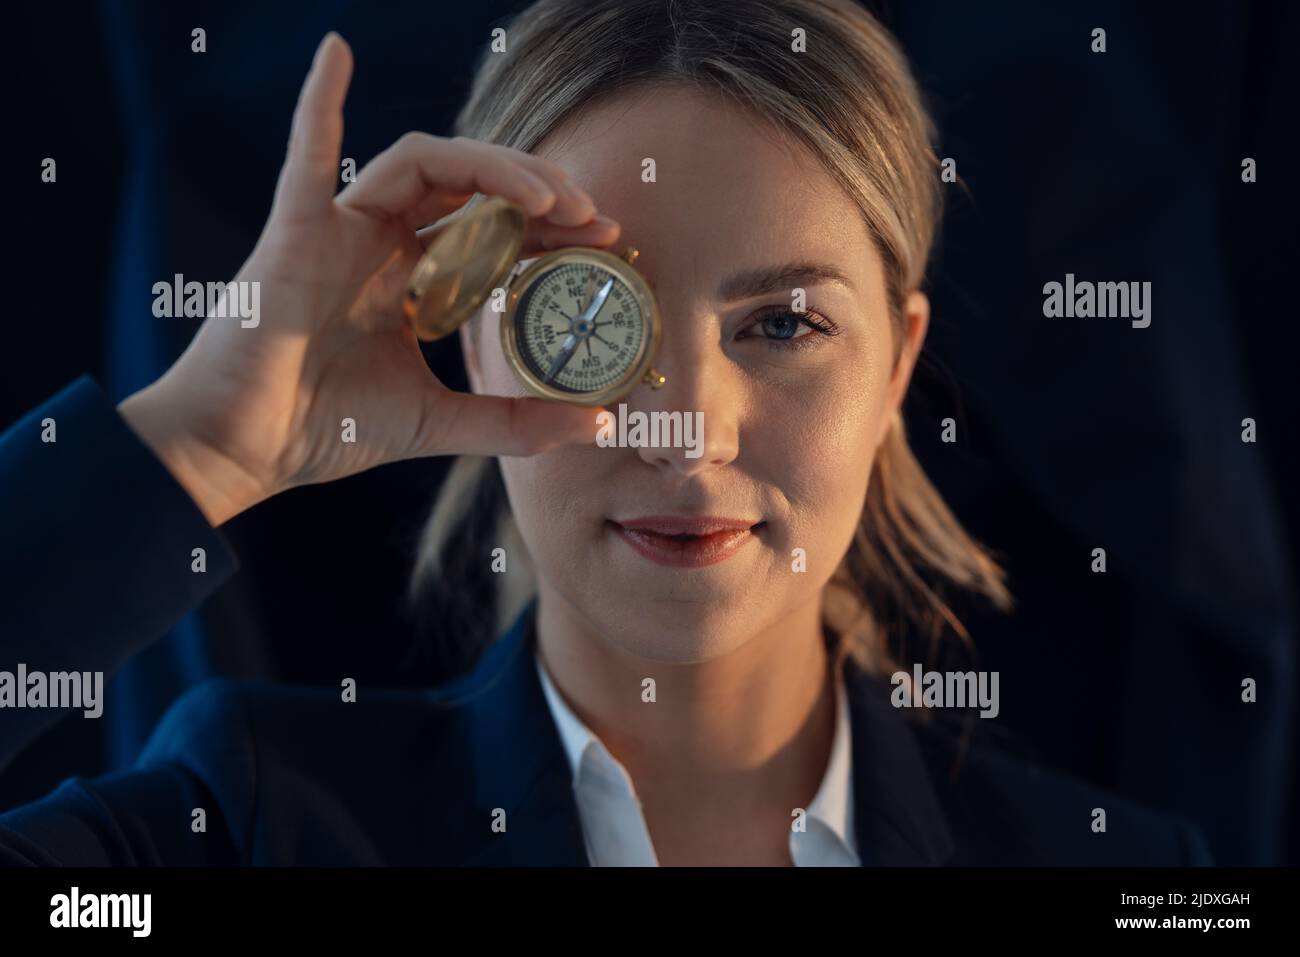 Businesswoman holding compass in front of eye against black background Stock Photo